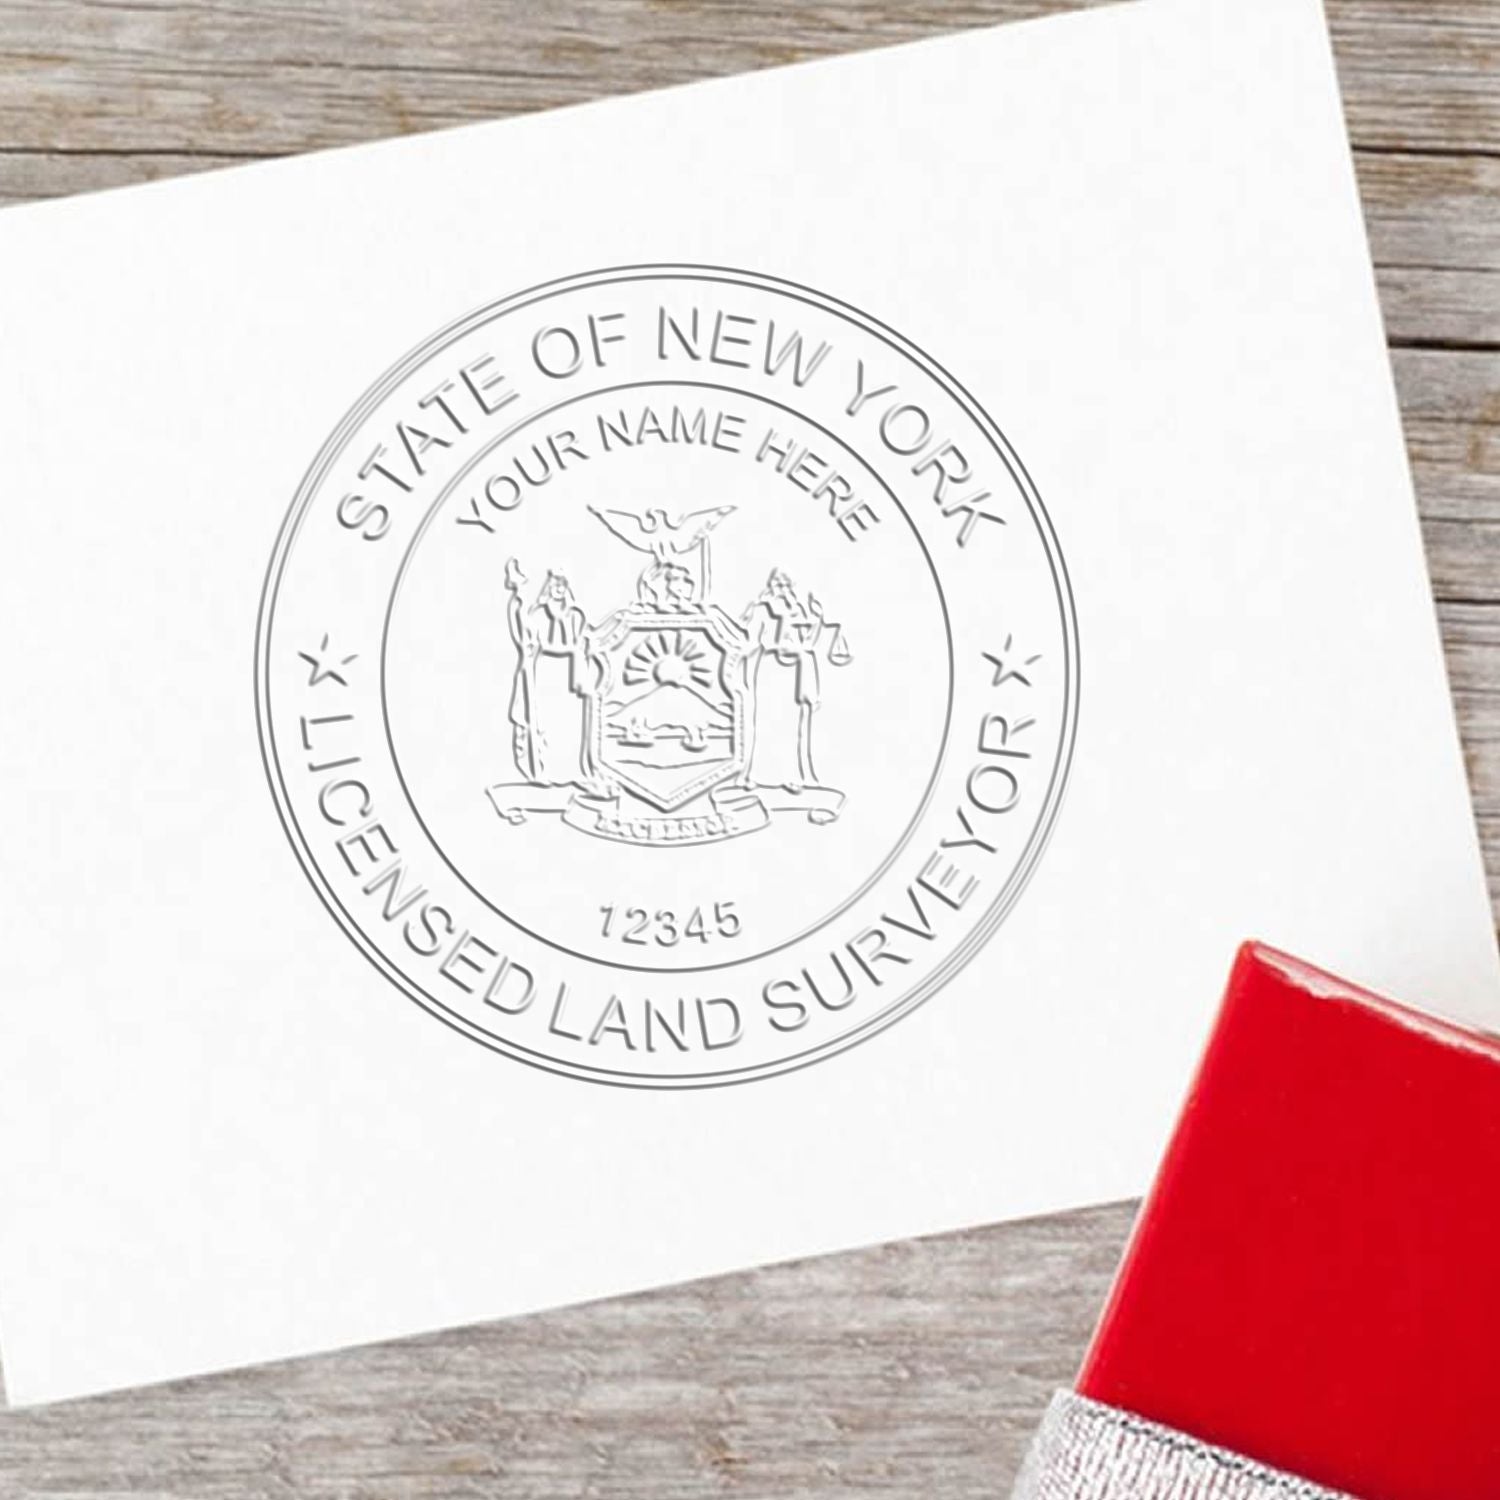 The Long Reach New York Land Surveyor Seal stamp impression comes to life with a crisp, detailed photo on paper - showcasing true professional quality.